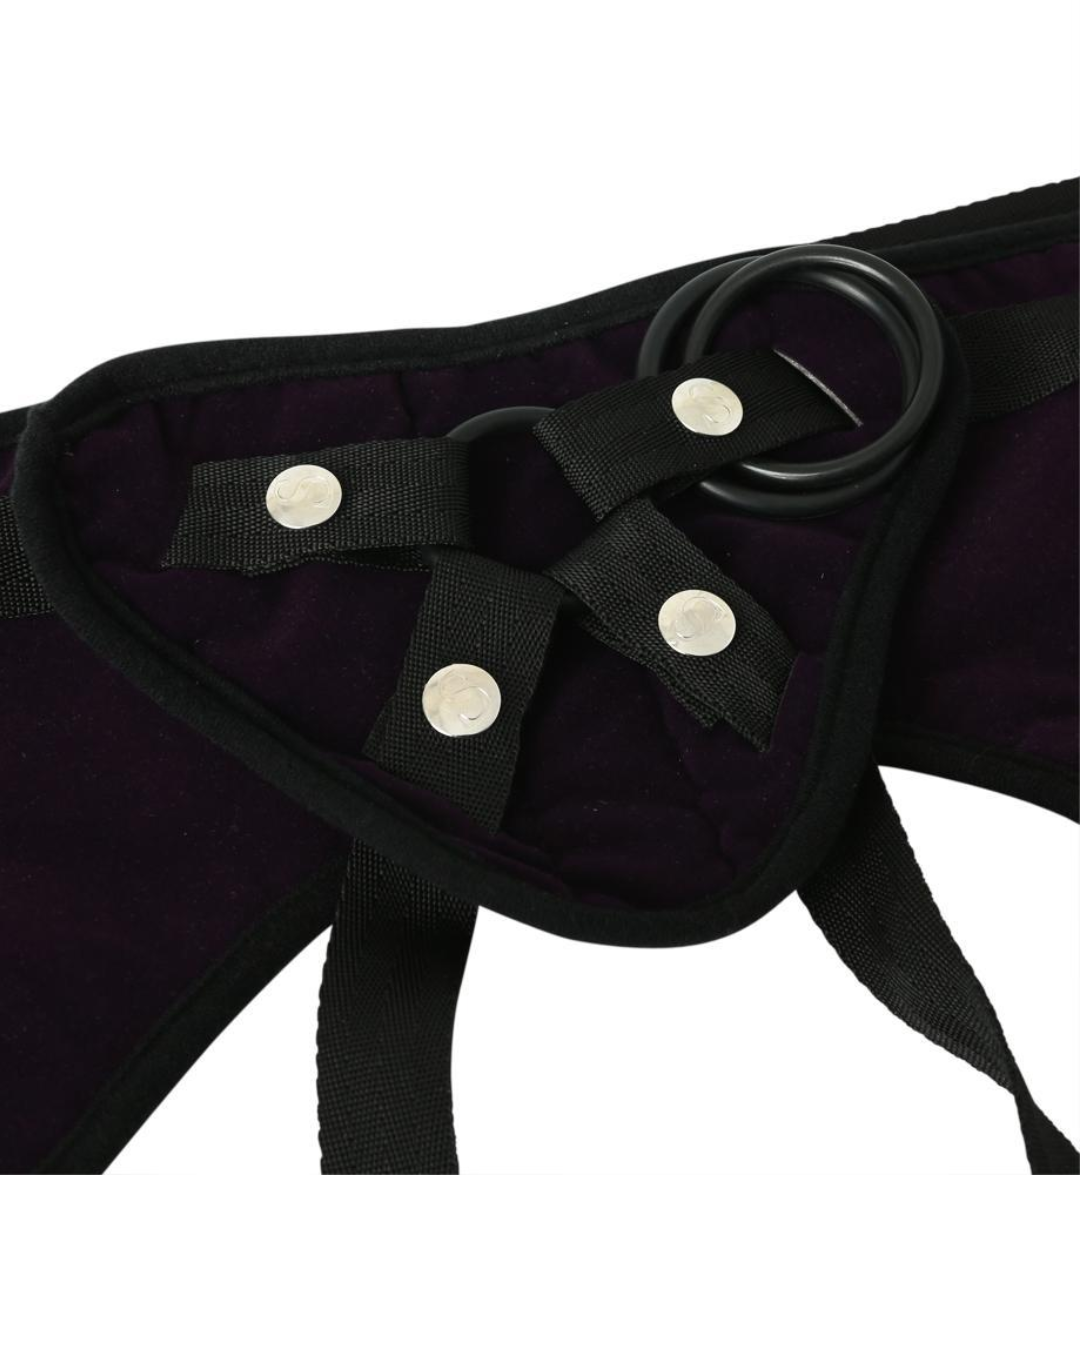 Sportsheets Plus Size Beginners Strap On Harness - Purple close up 